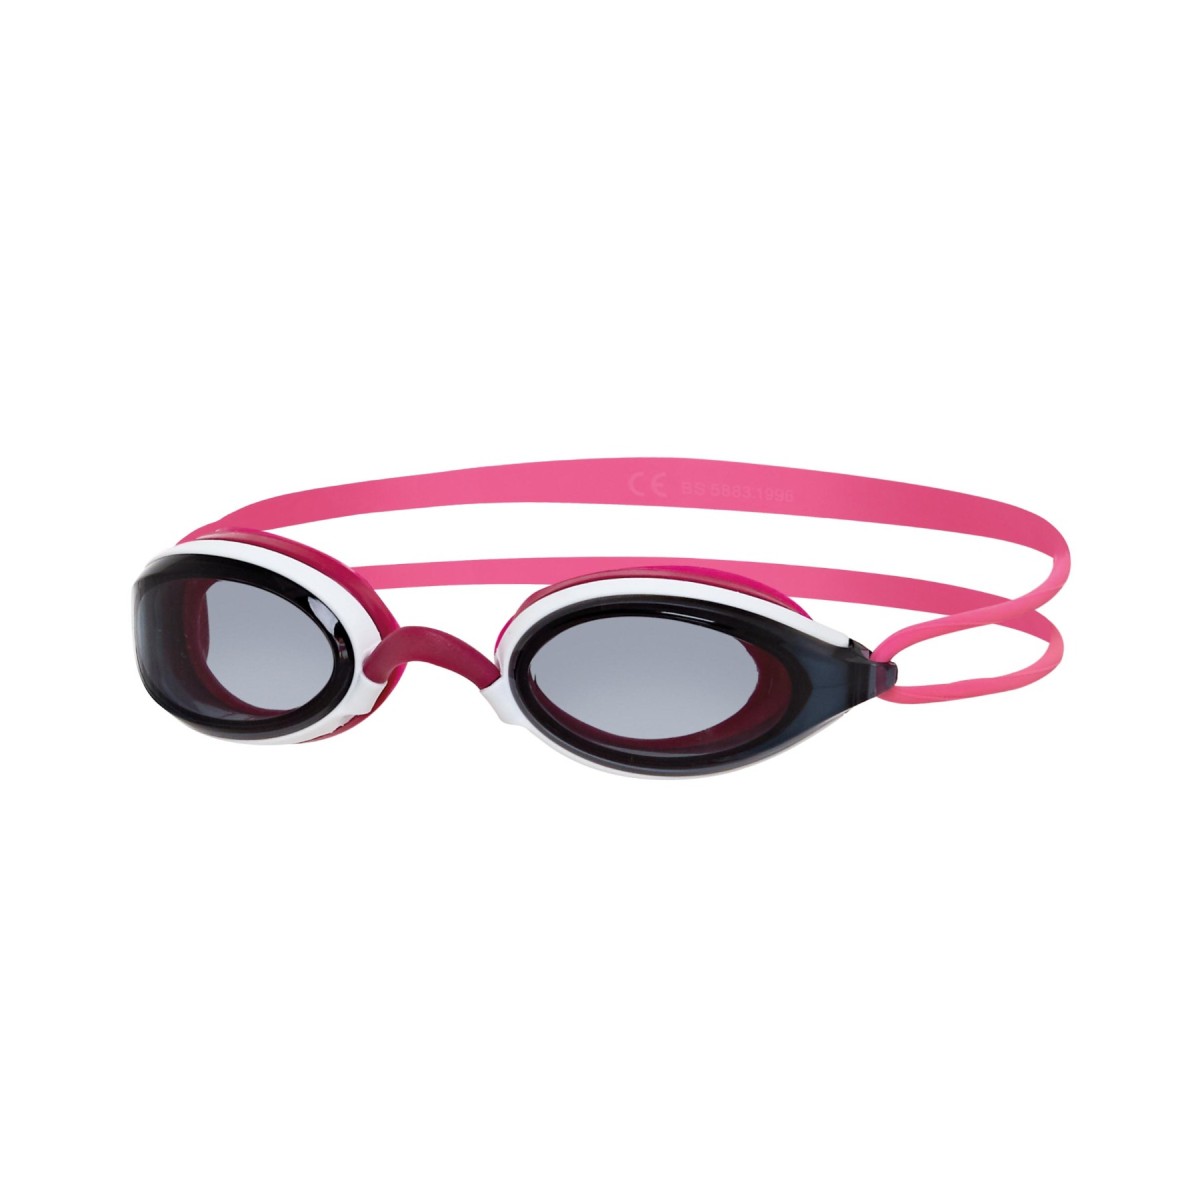 SWIMMING GOGGLES FUSION AIR WHITE/PINK ZOGGS - view 1